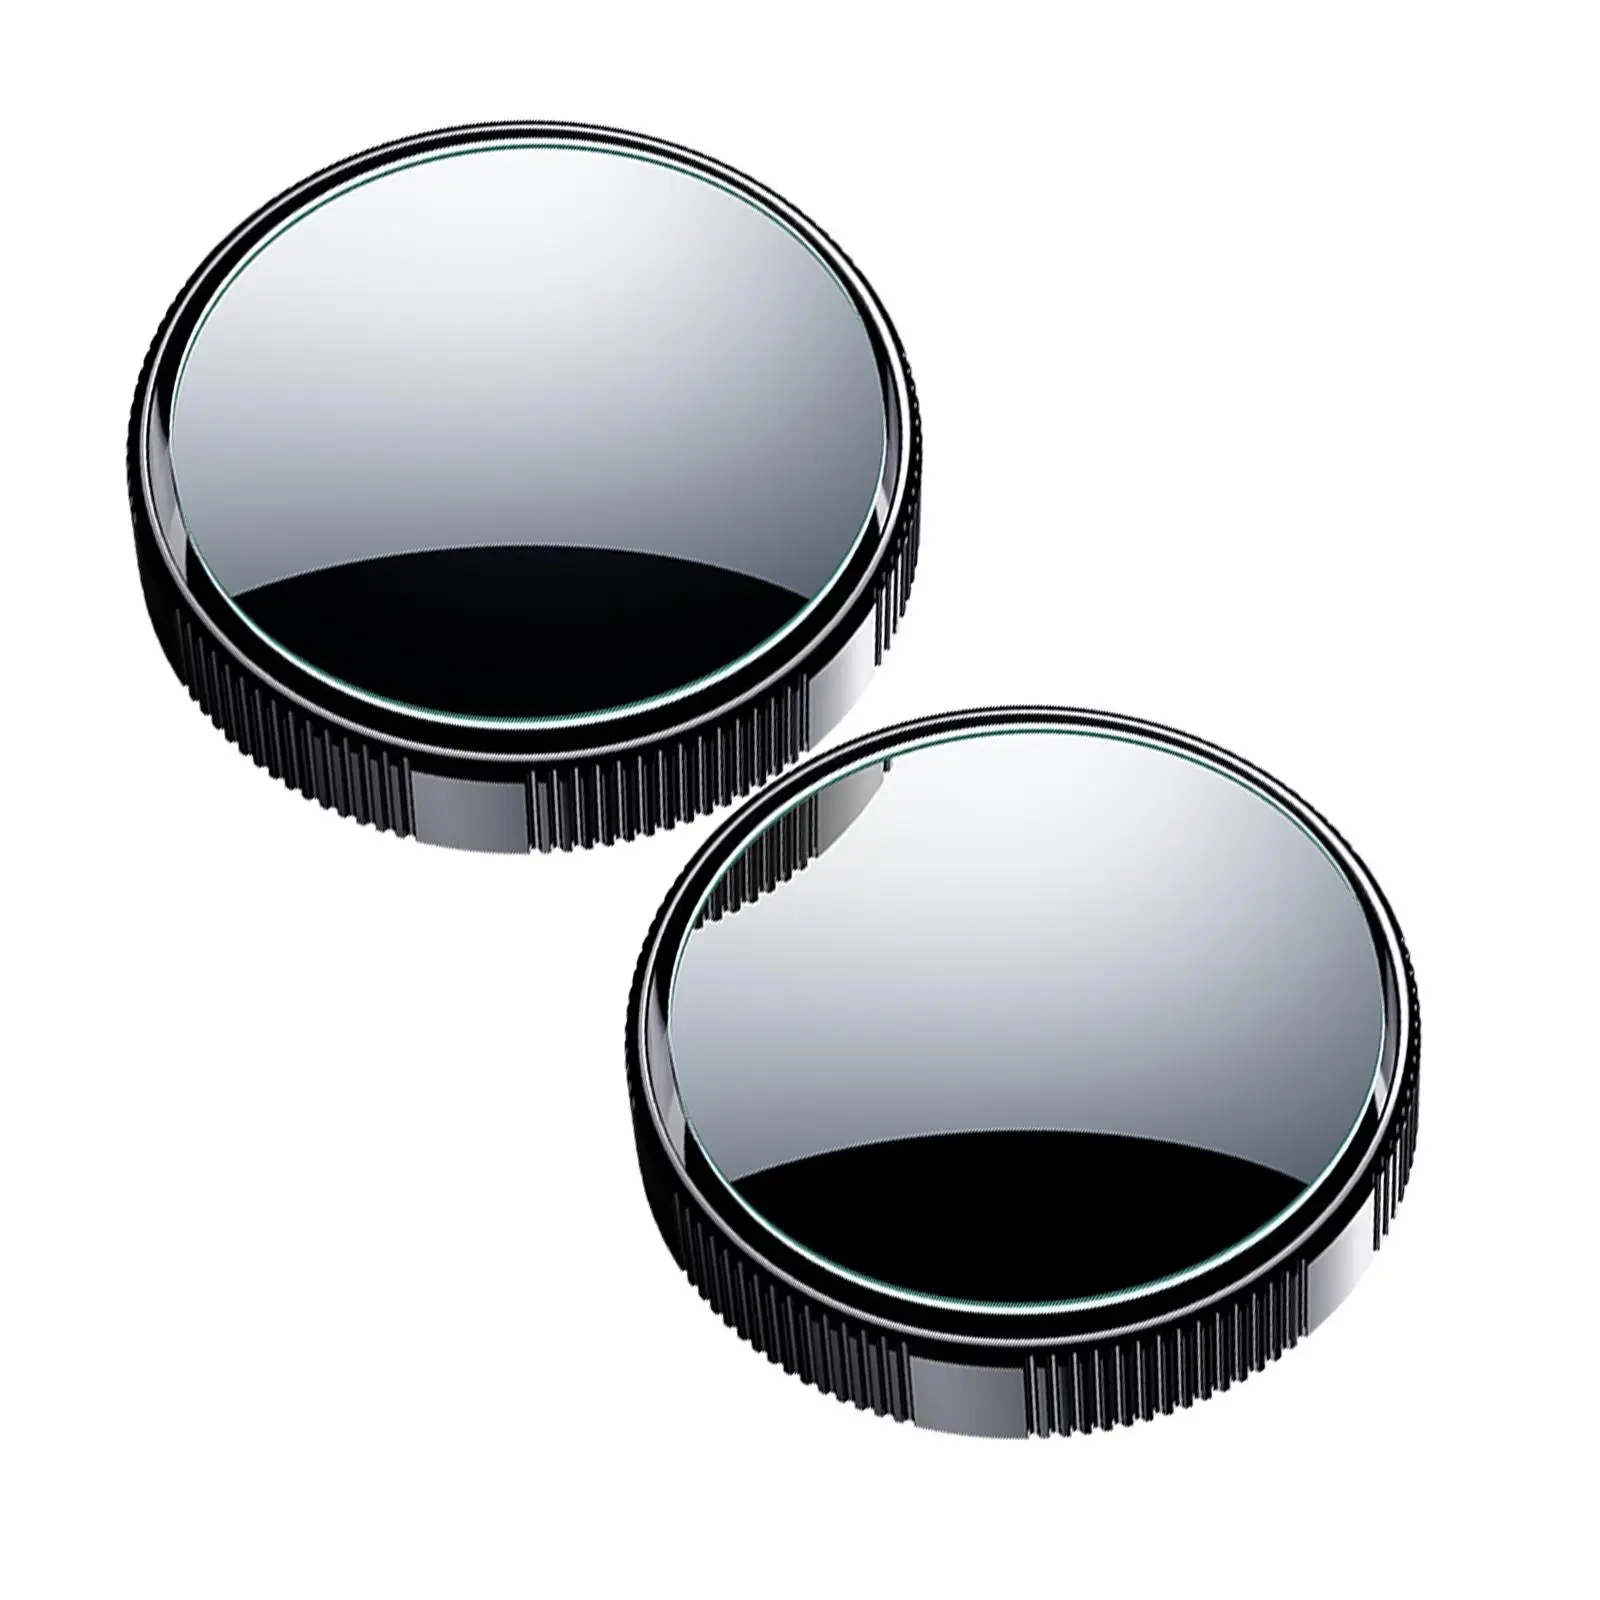 2x Blind Spot Mirrors Adjustable Rearview Mirror 360 Wide Angle ABS Housing HD Glass Convex Mirror for Cars SUV Trucks